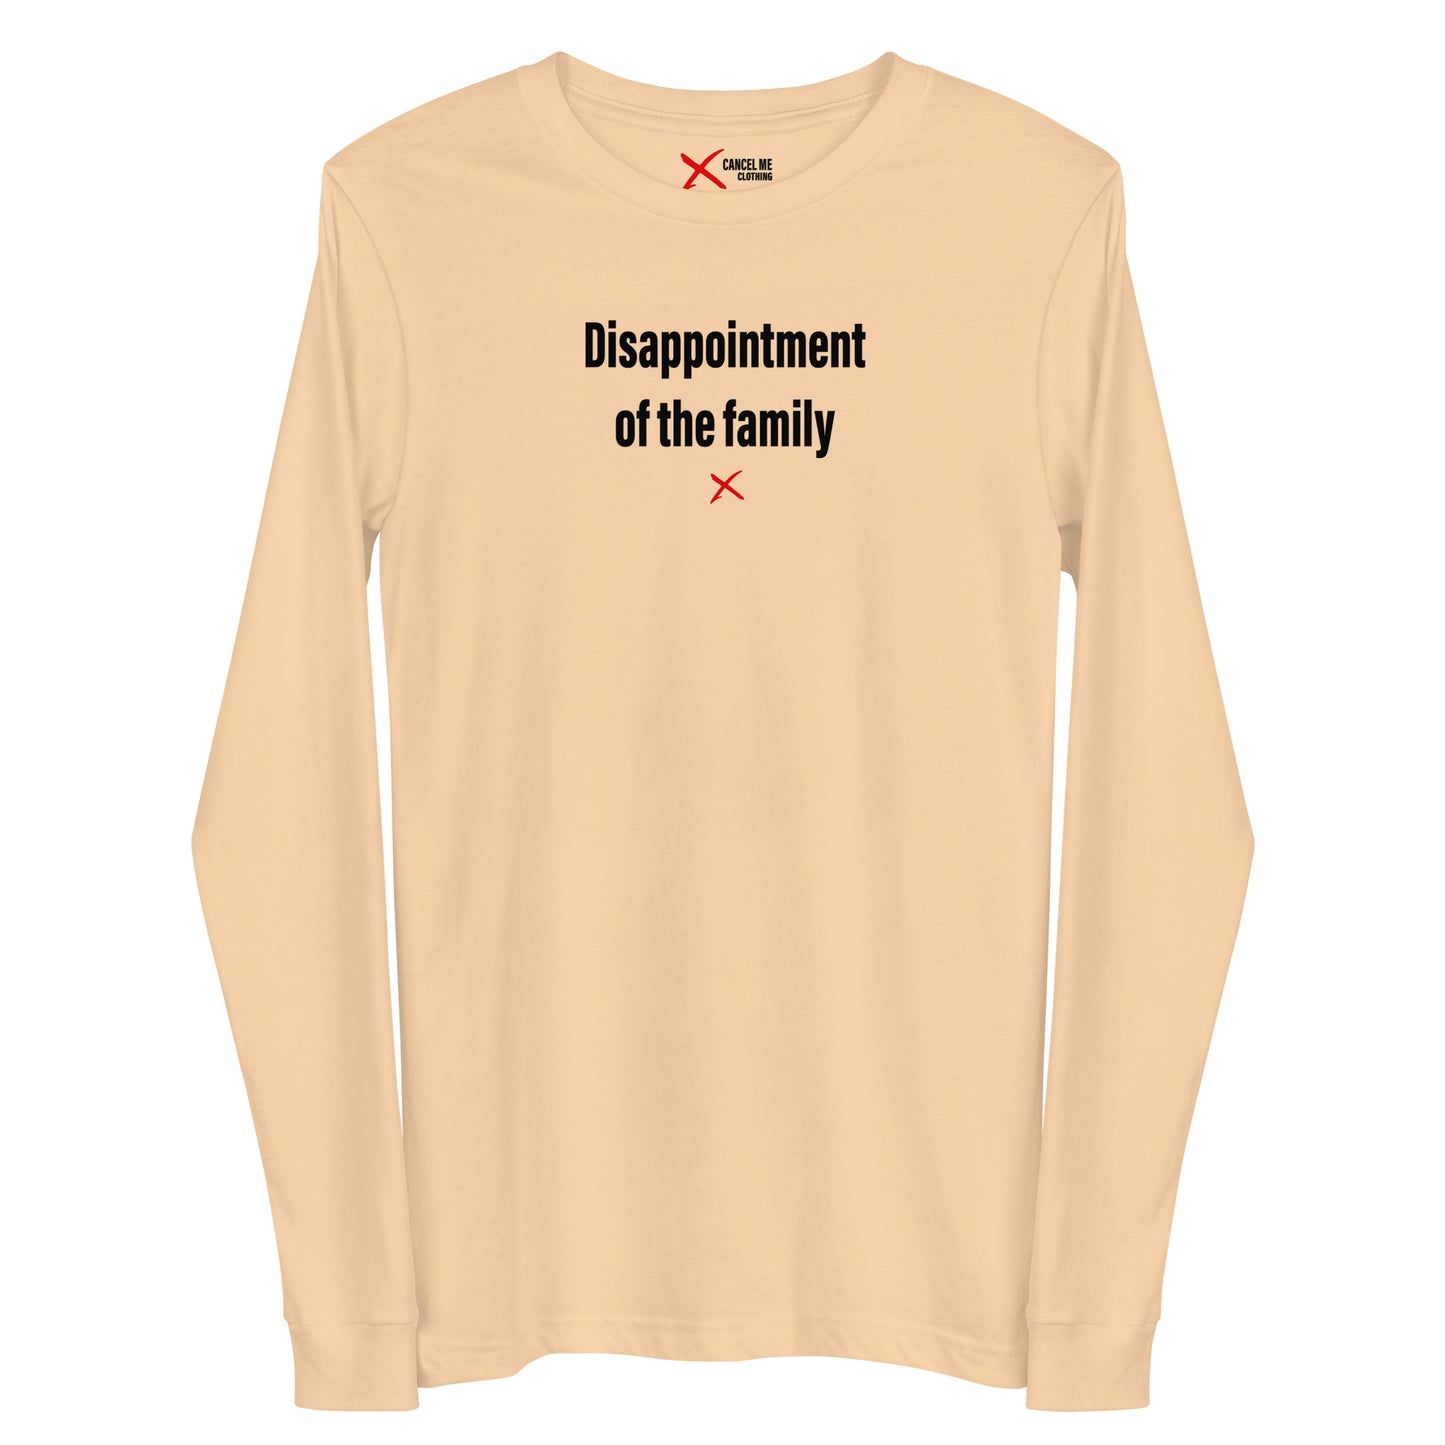 Disappointment of the family - Longsleeve